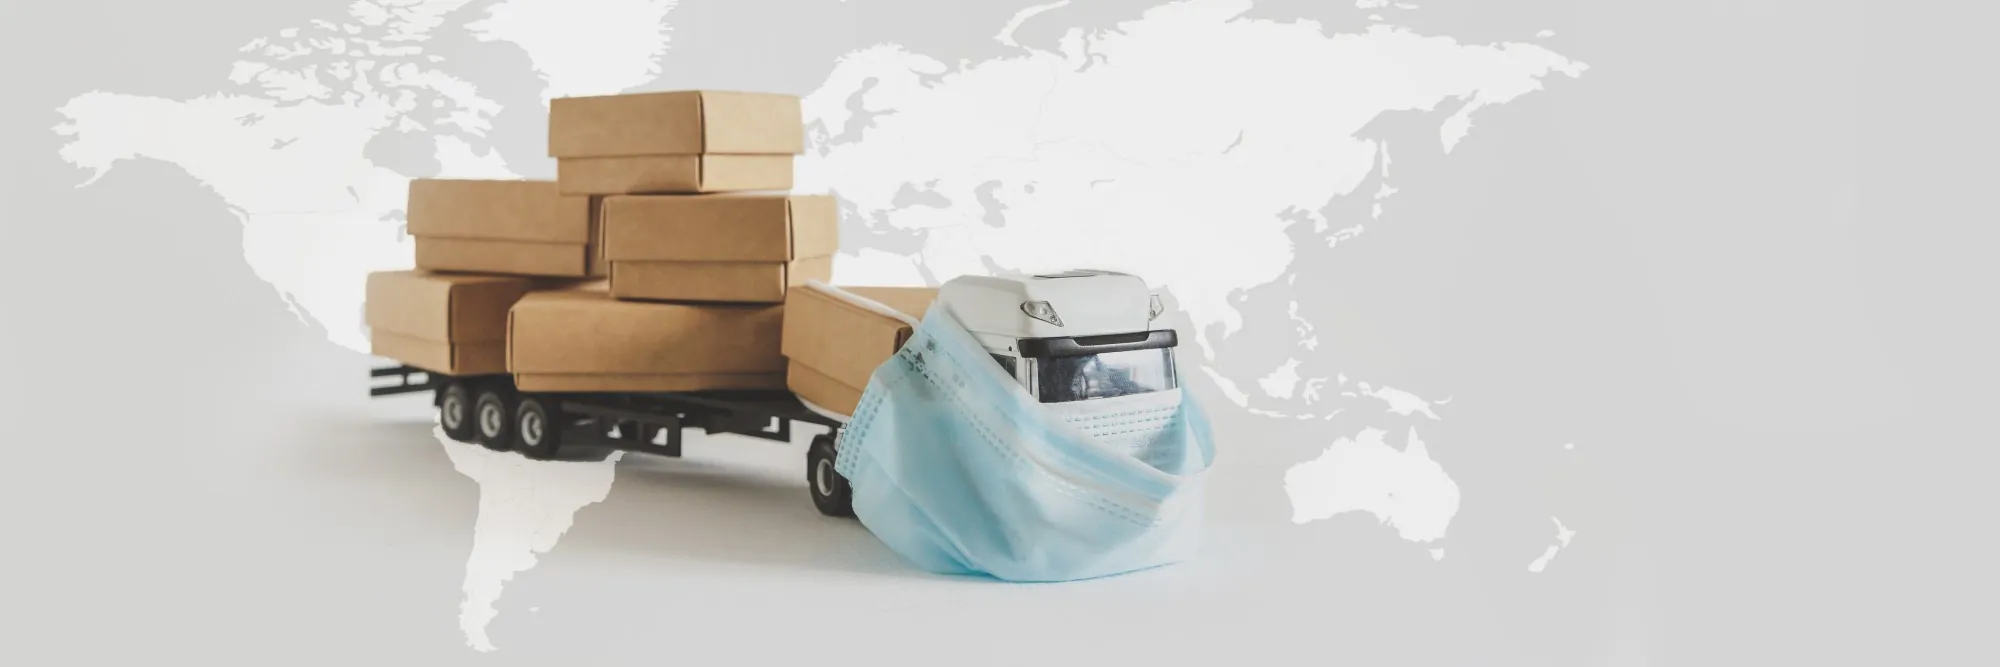 freight-shipping-during-coronavirus-toy-truck-wearing-mask-in-front-of-world-map